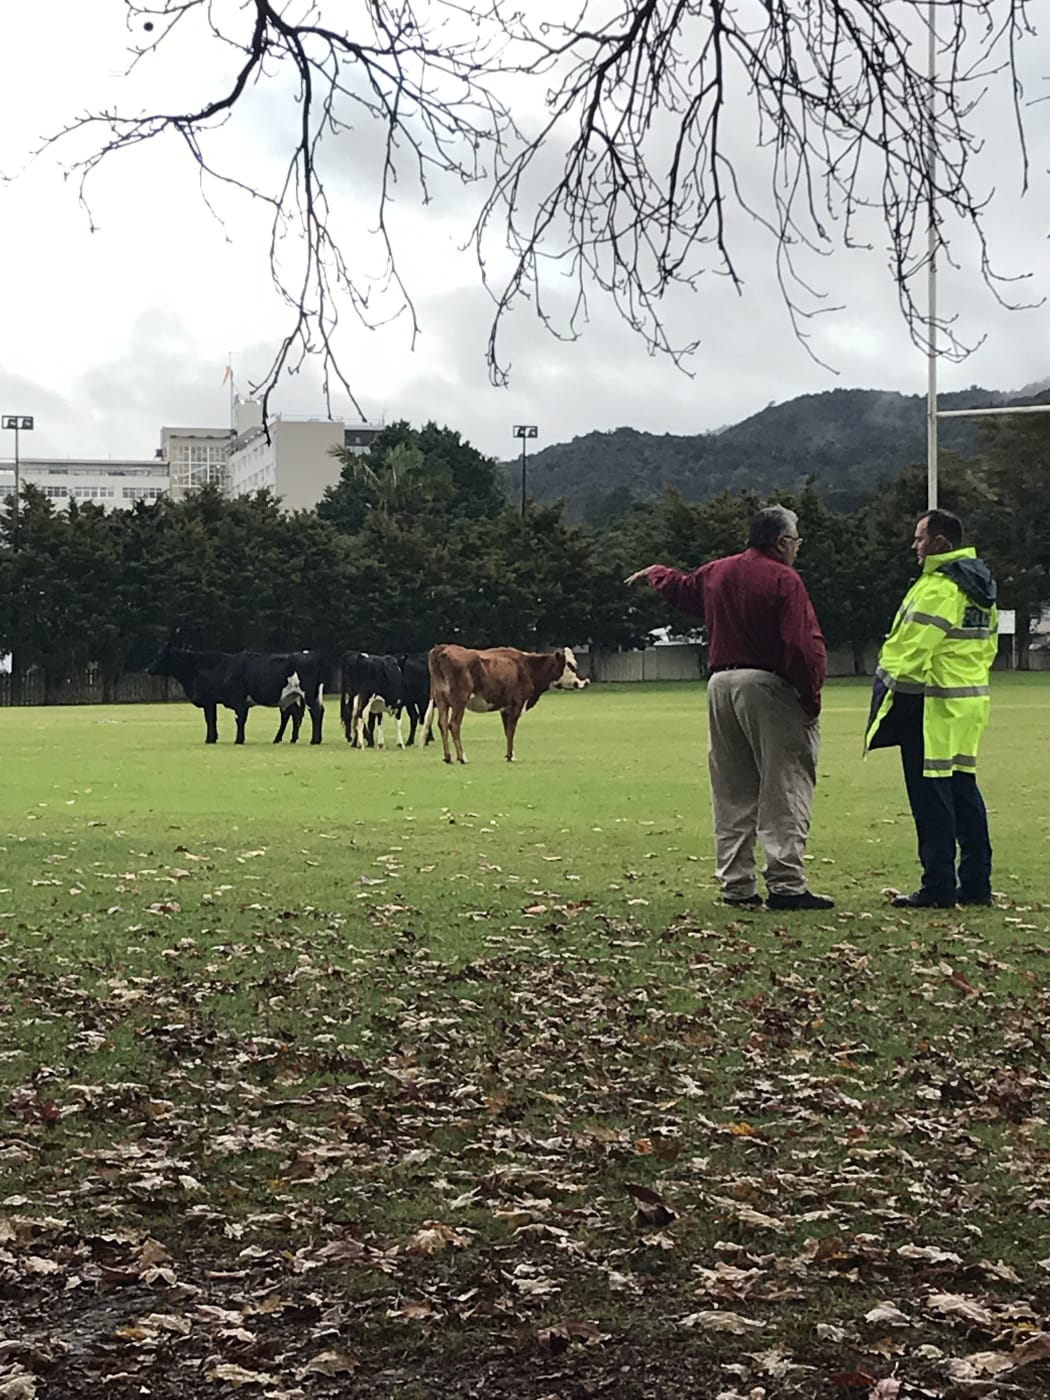 Pat Newman offers a police officer the correct arrest strategy for the cows at Hora Hora School.